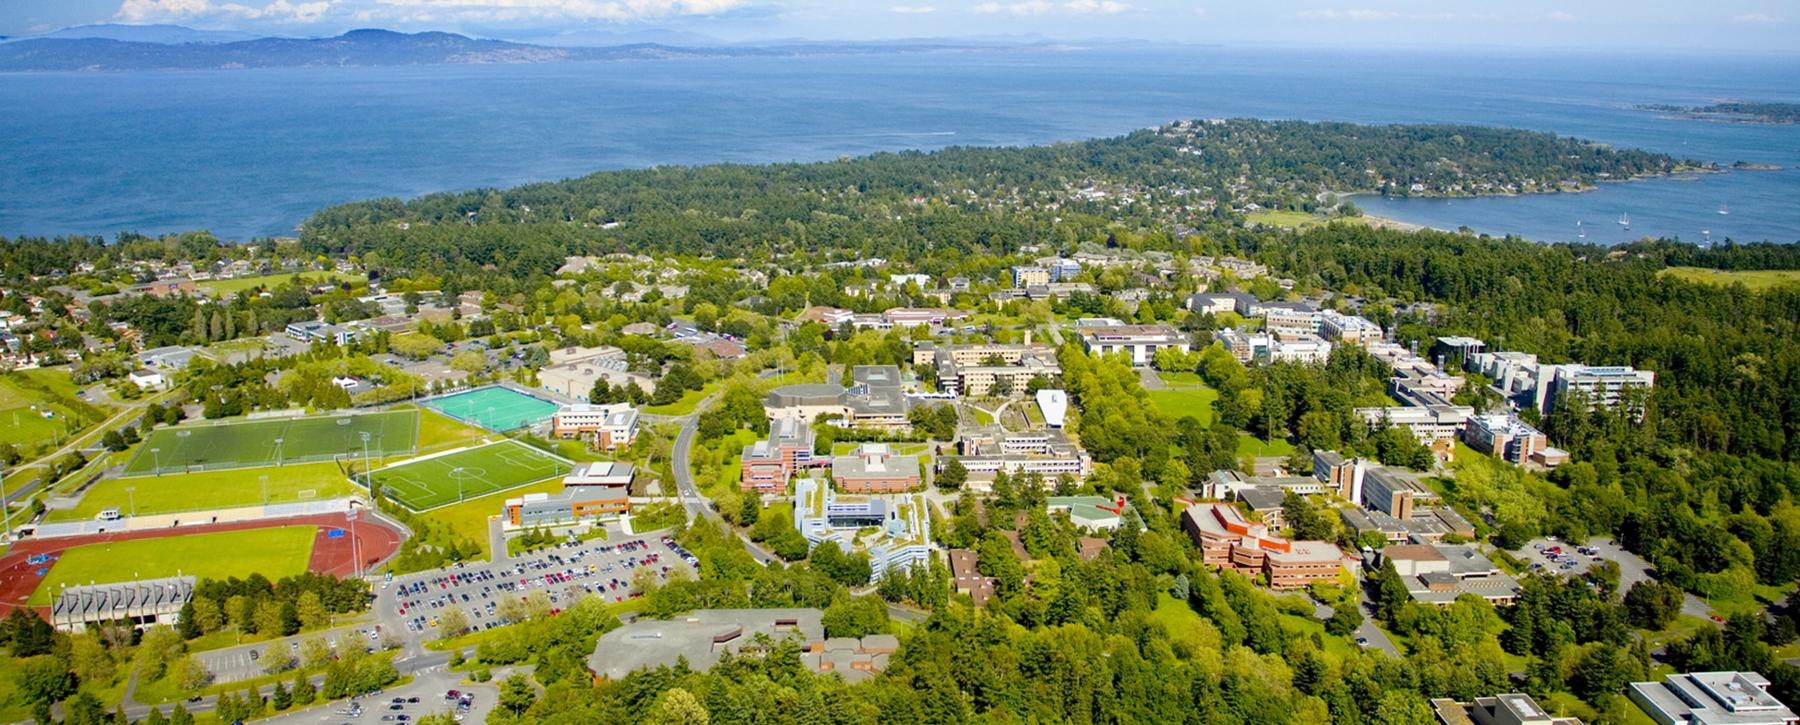 About the university - University of Victoria